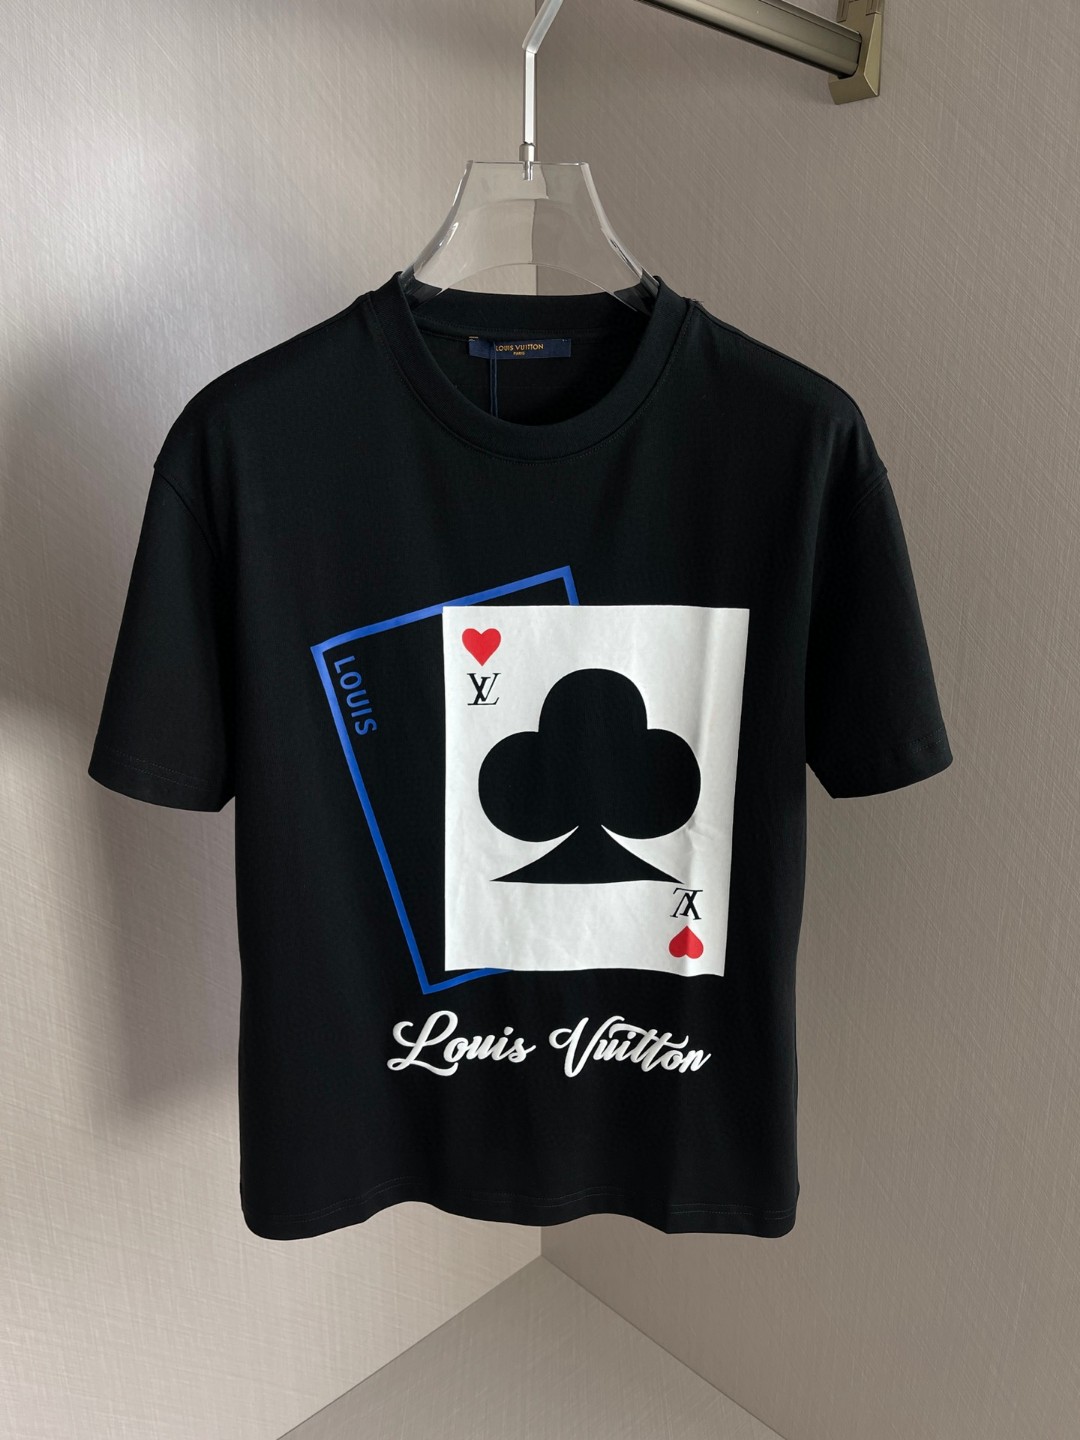 Louis Vuitton Clothing T-Shirt Black White Unisex Cotton Spring/Summer Collection Fashion Long Sleeve